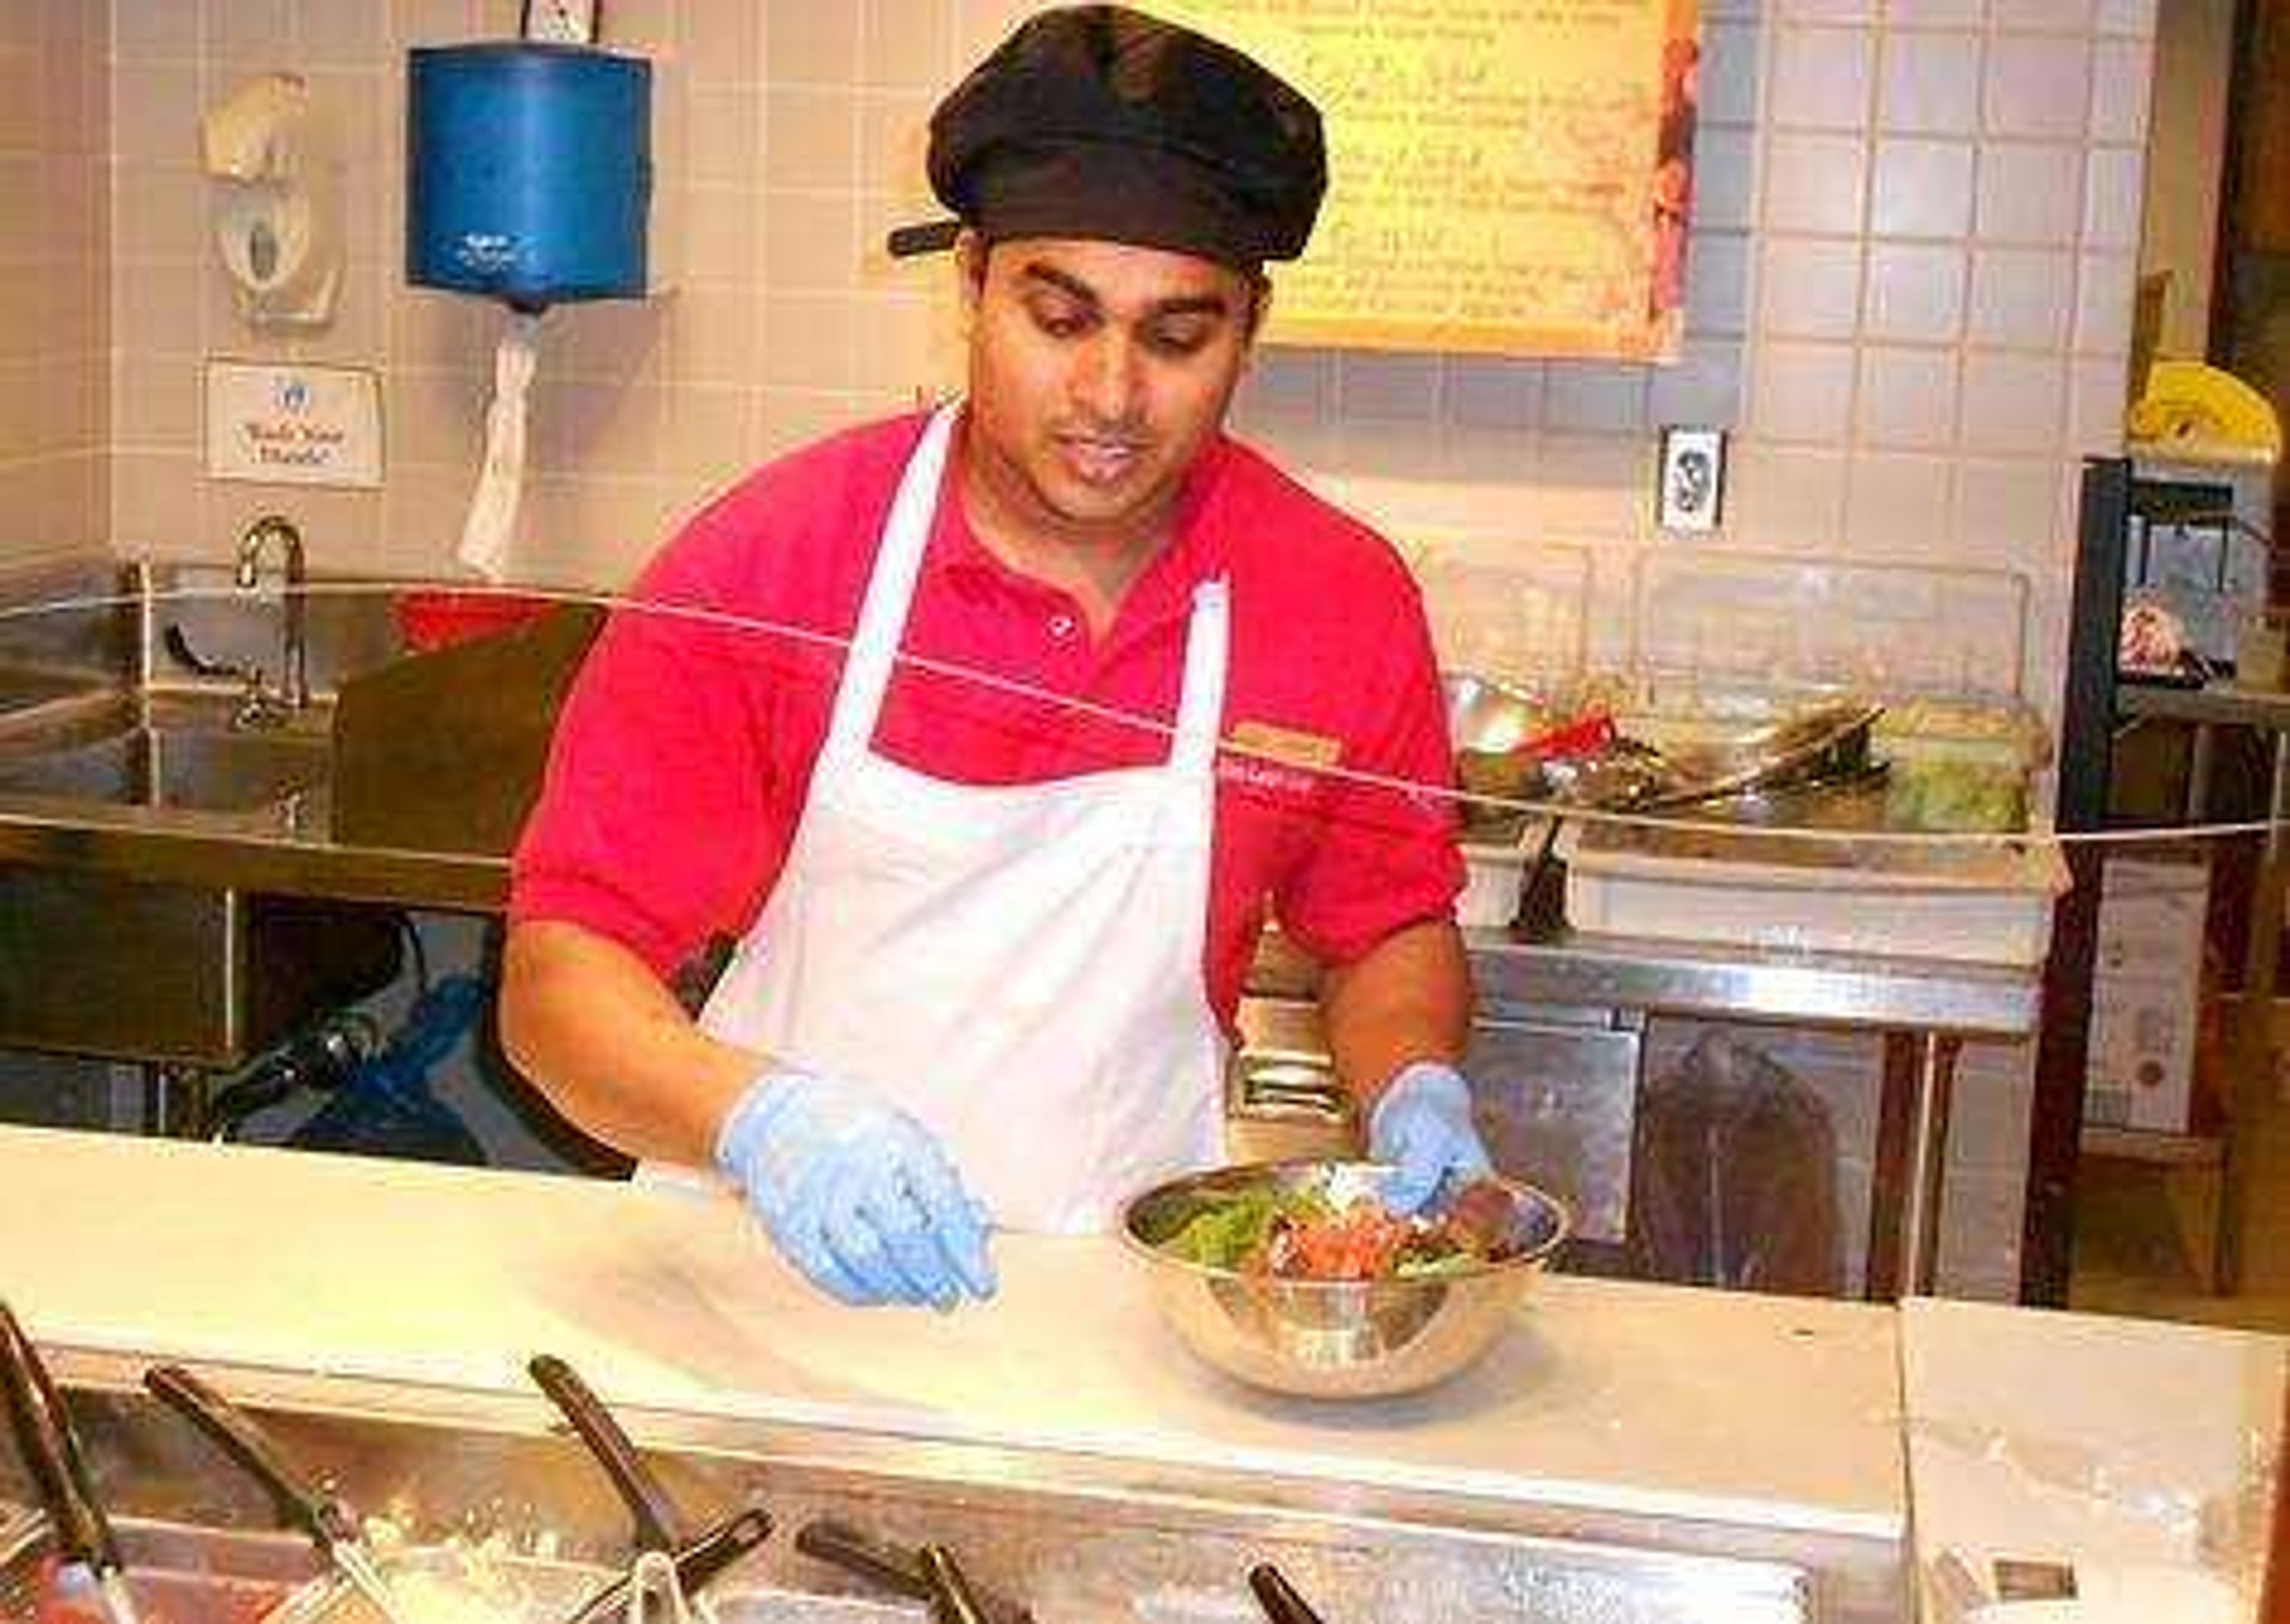 International student and Chartwells employee Rajesh Vemuri prepares a meal. Photo by Kyle Thies